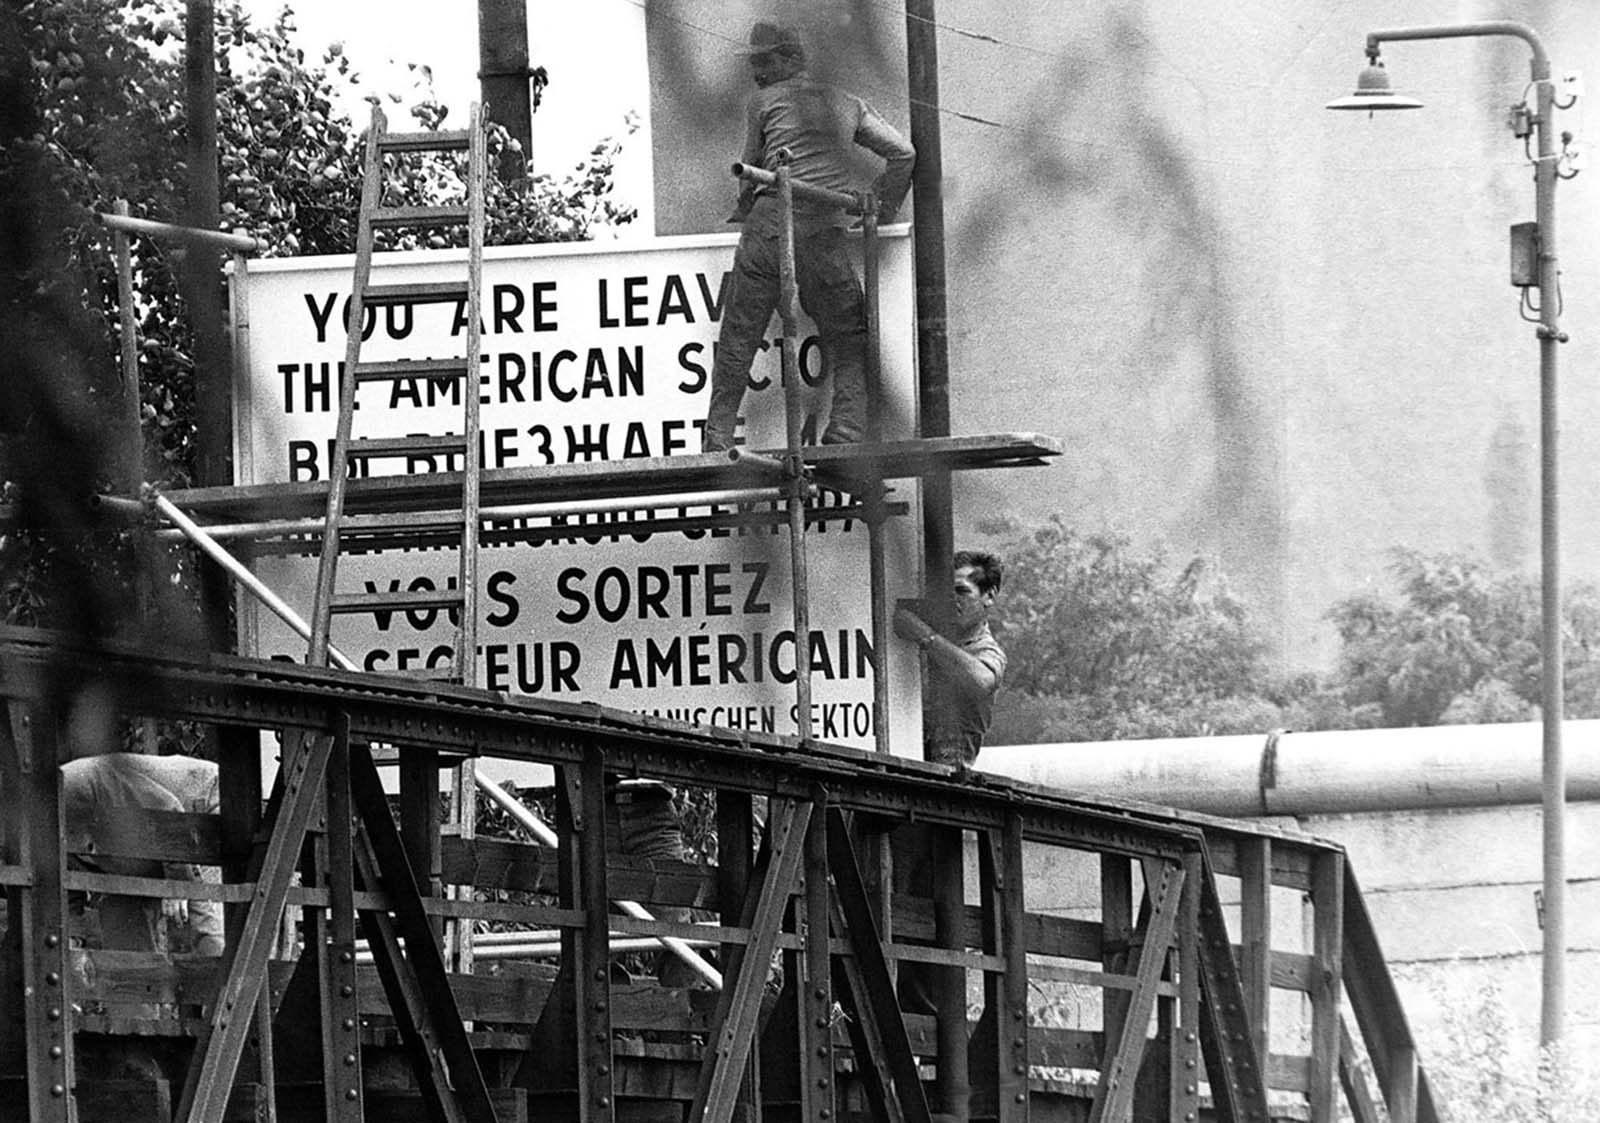 Workers set up a sign warning pedestrians they are leaving the American sector of Berlin, Germany, on Wiener Strasse (Vienna Street) in the district of Kreuzberg in West Berlin, on August 13, 1961.